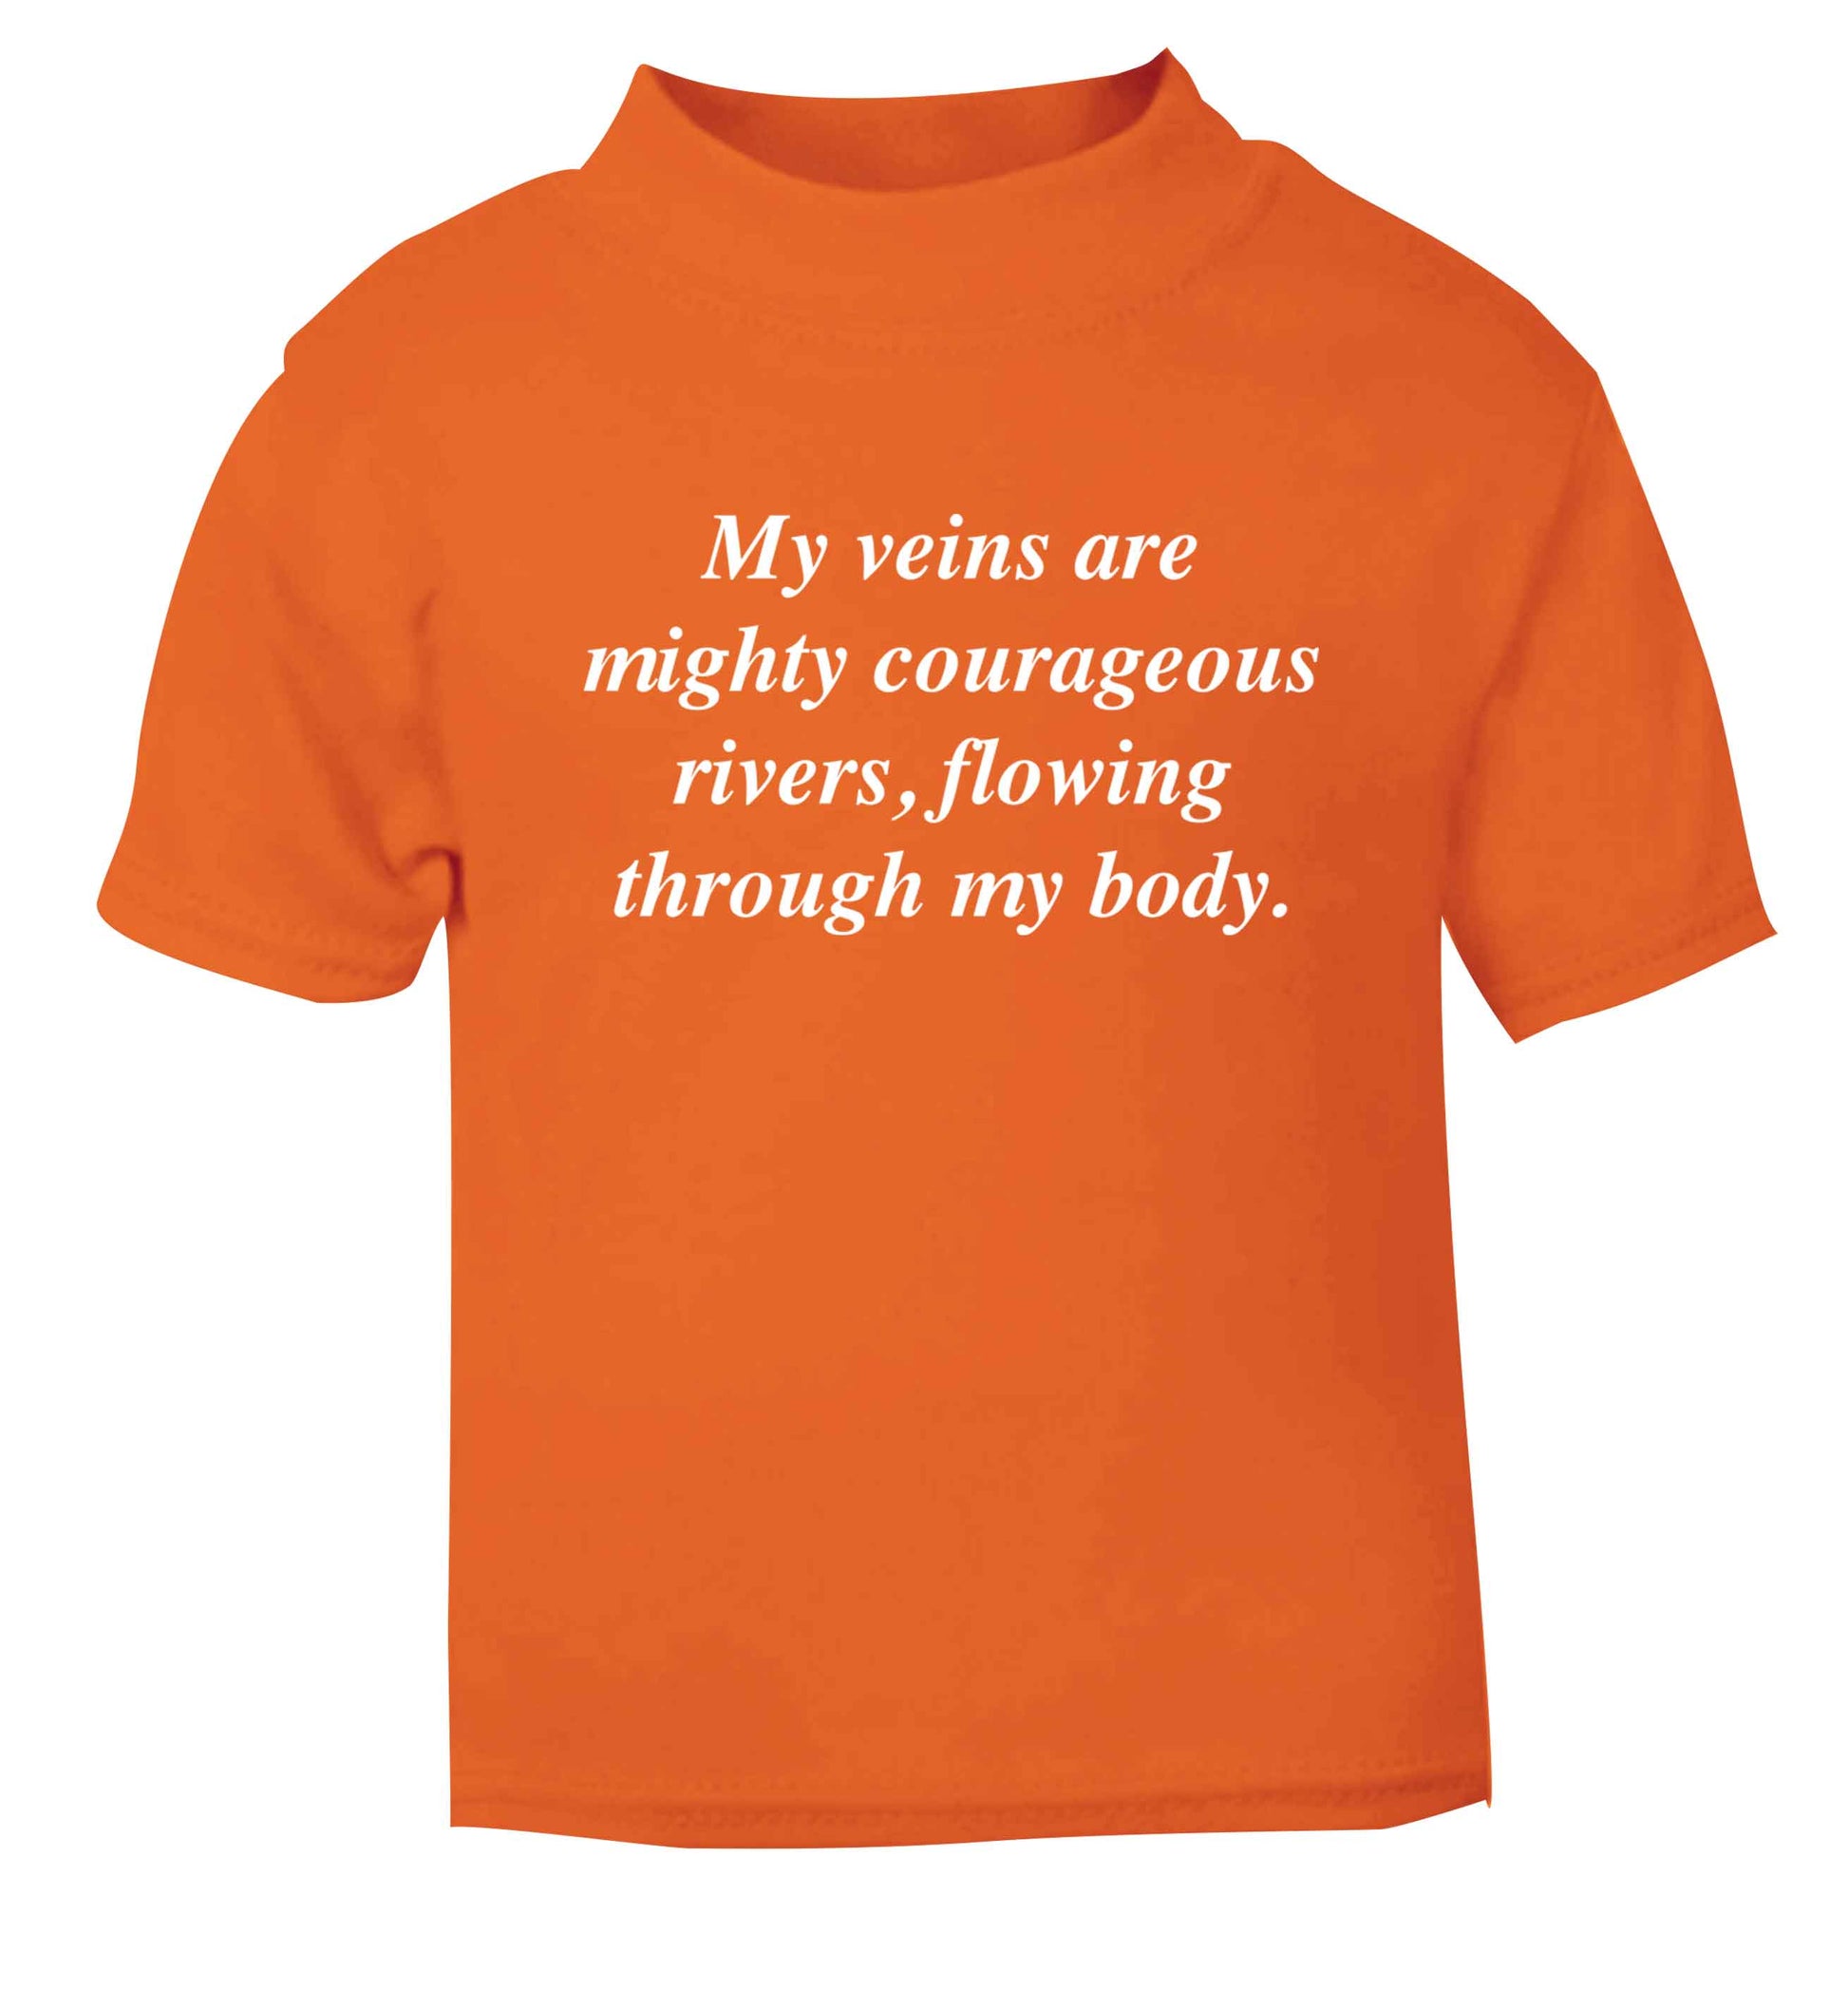 My veins are mighty courageous rivers, flowing through my body orange baby toddler Tshirt 2 Years